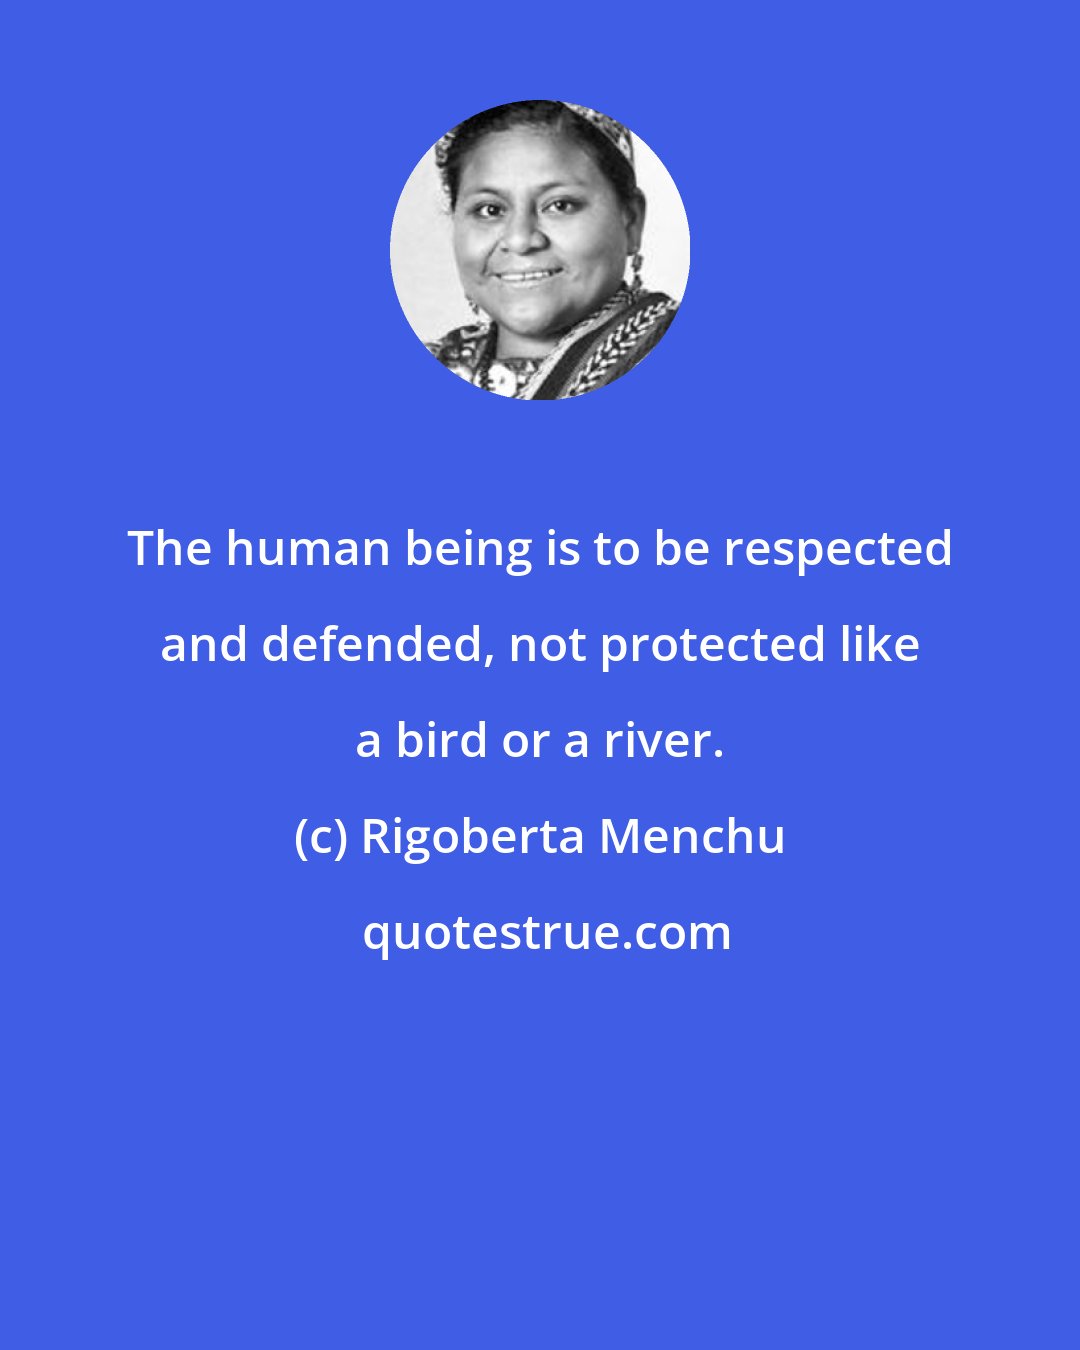 Rigoberta Menchu: The human being is to be respected and defended, not protected like a bird or a river.